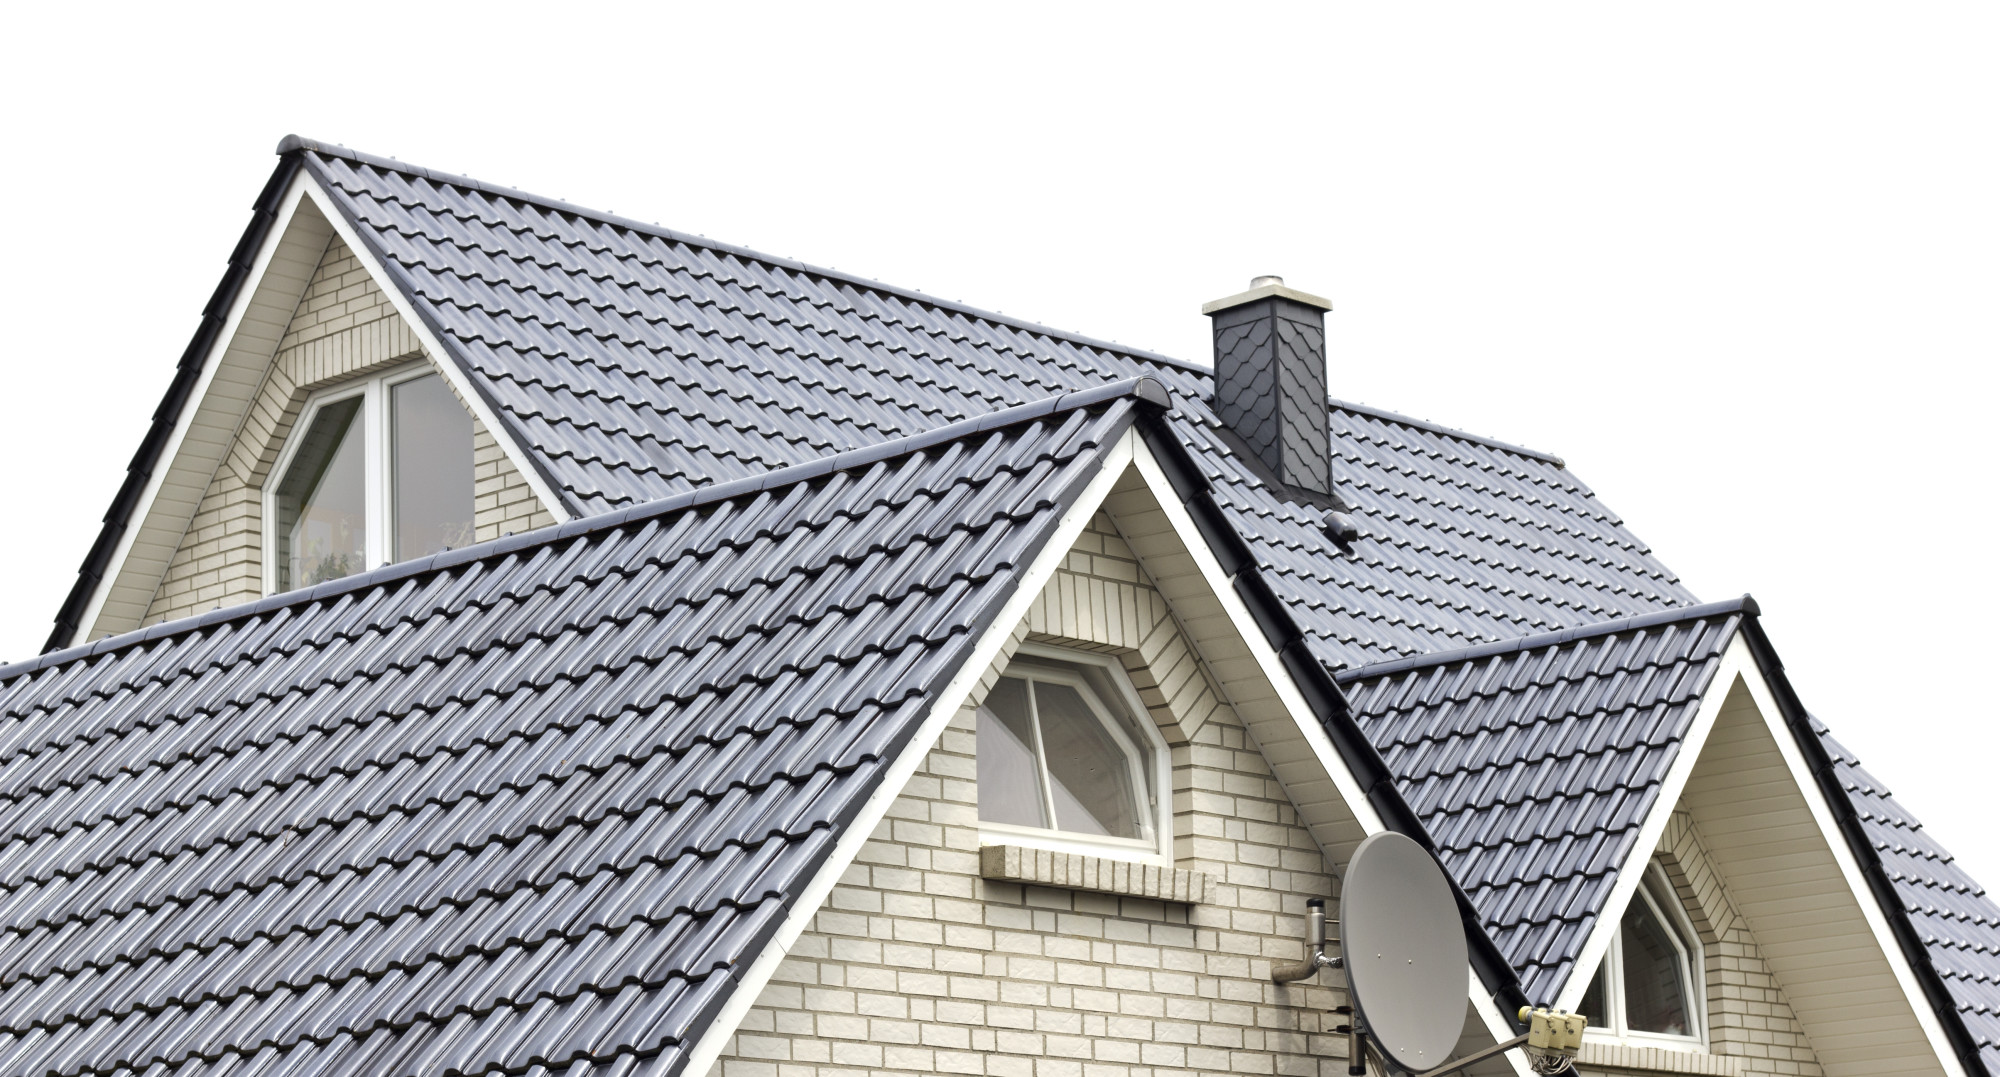 An essential component of your roof that prevents rain water from leaking through your roof, explore common roof flashing problems and how to fix them.